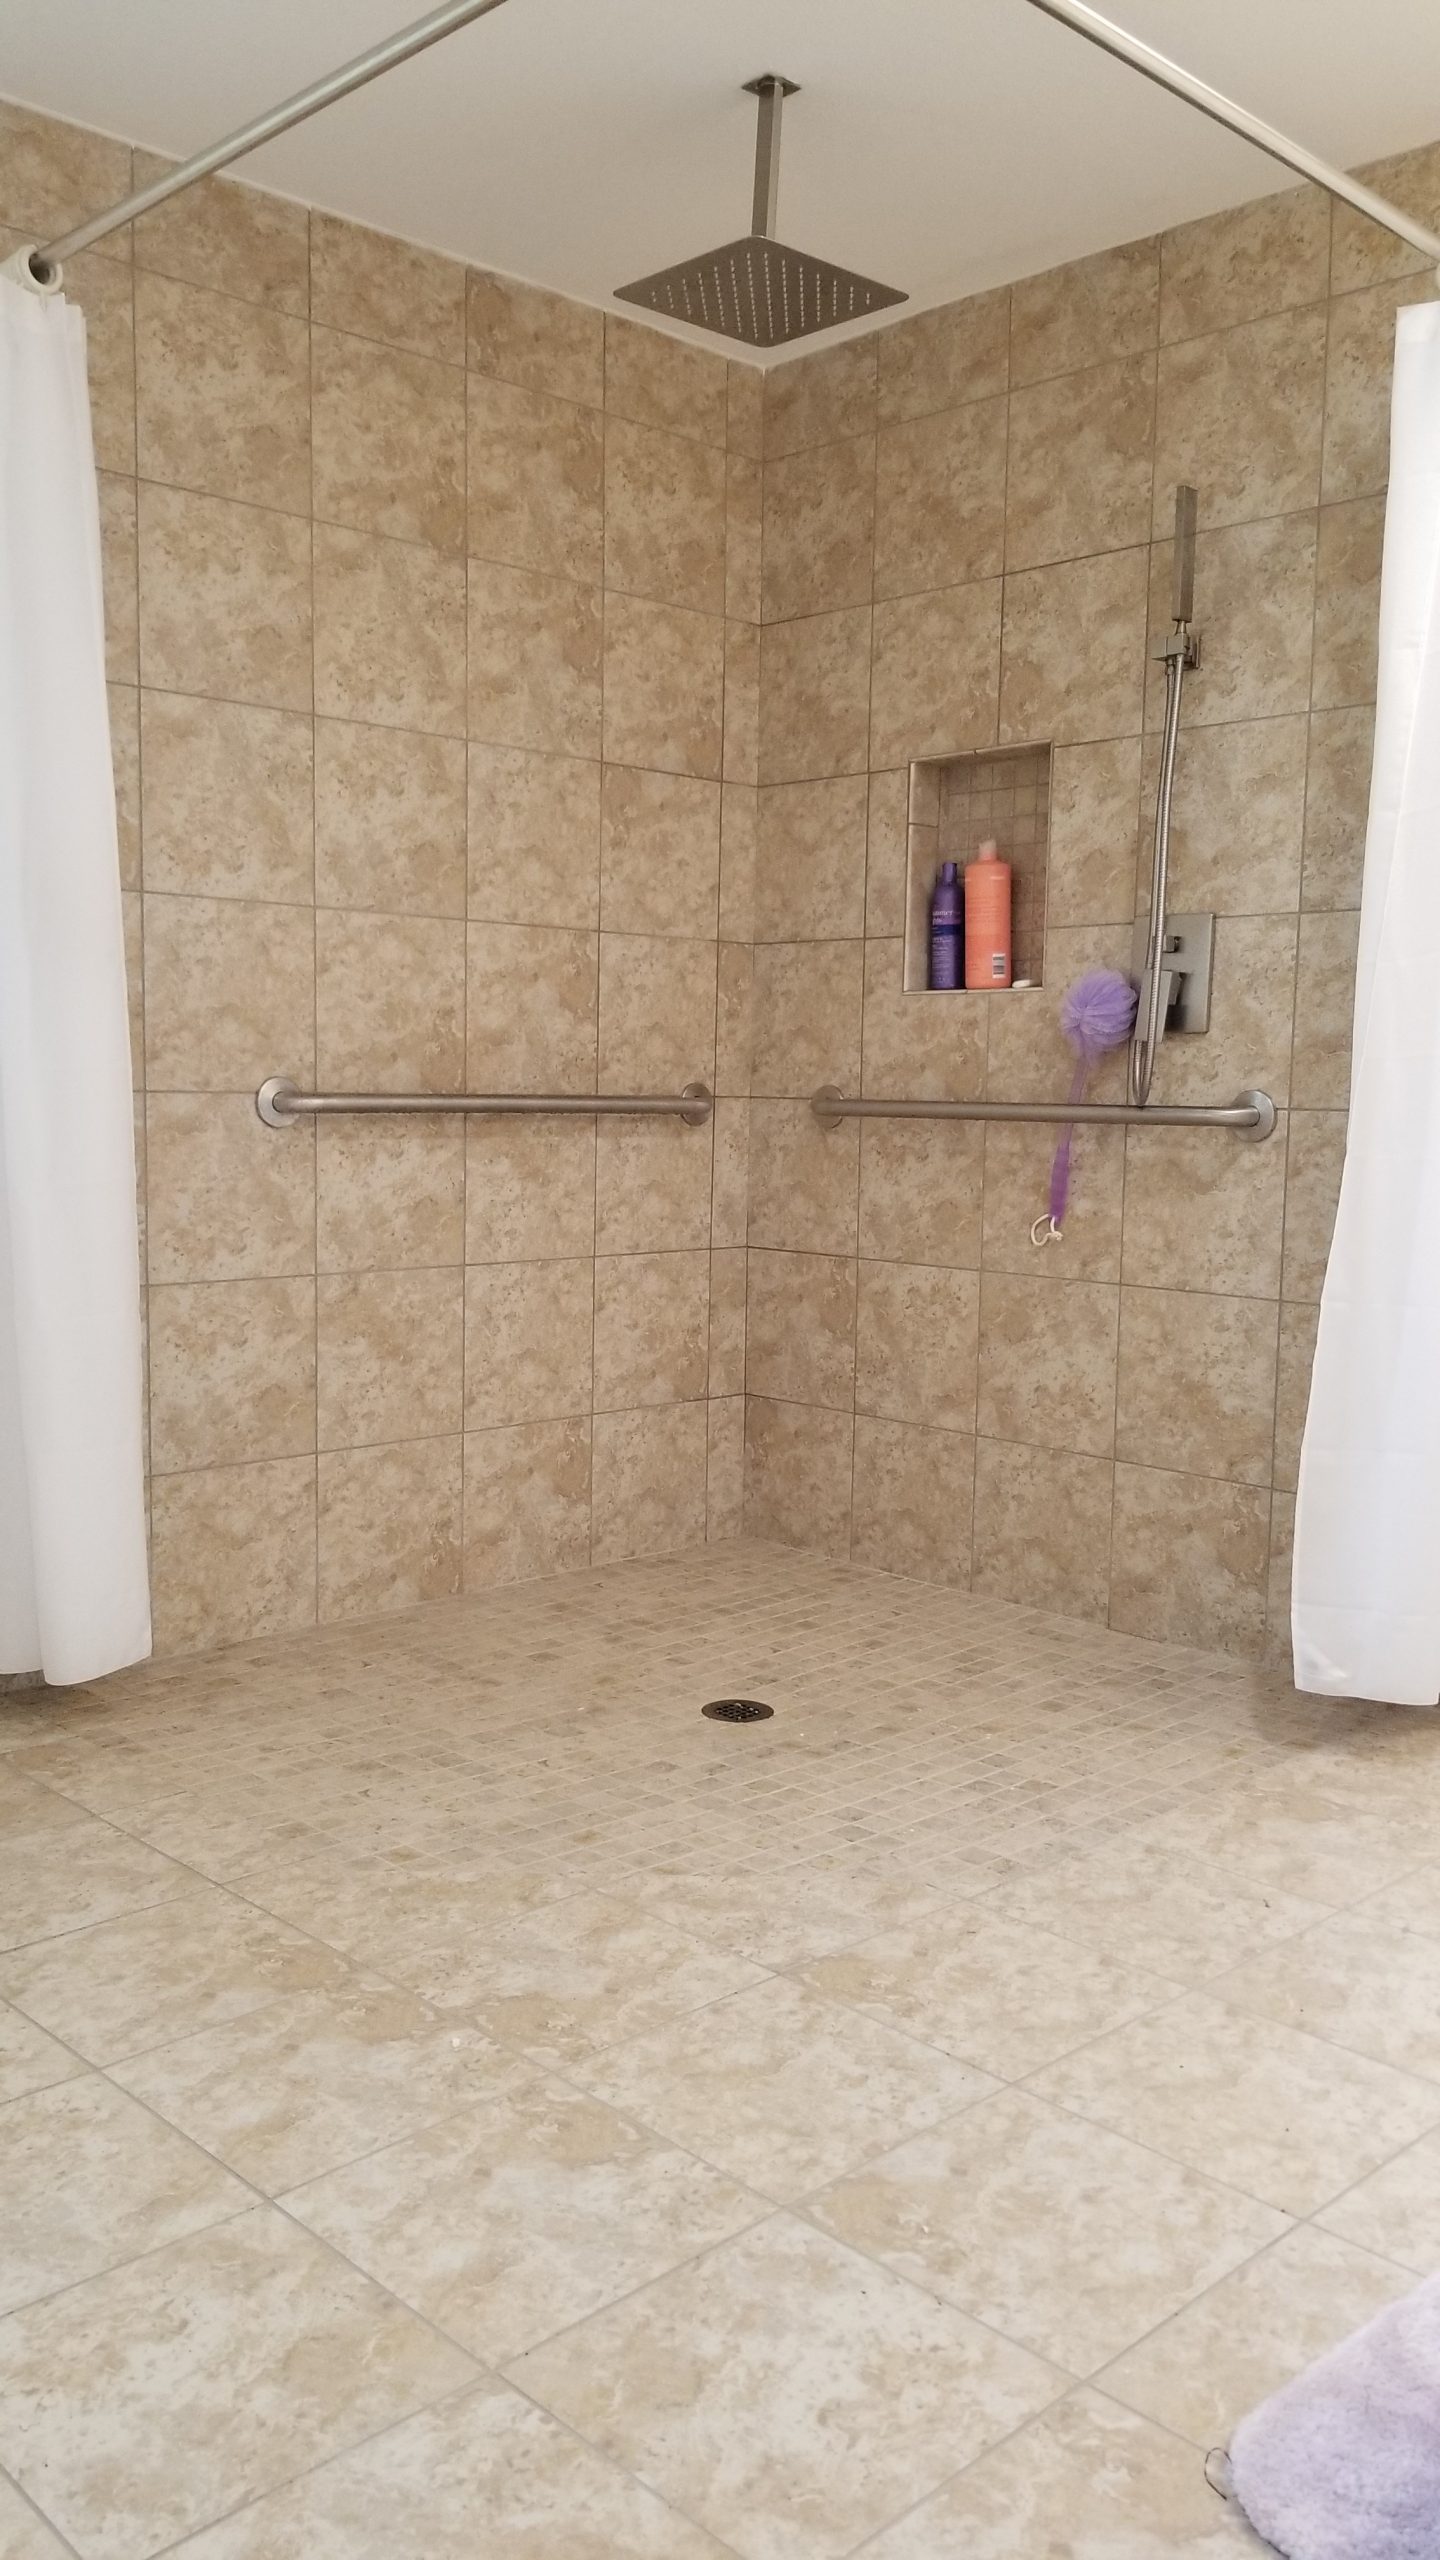 The Barrier Free Walk-In Shower System in a shower